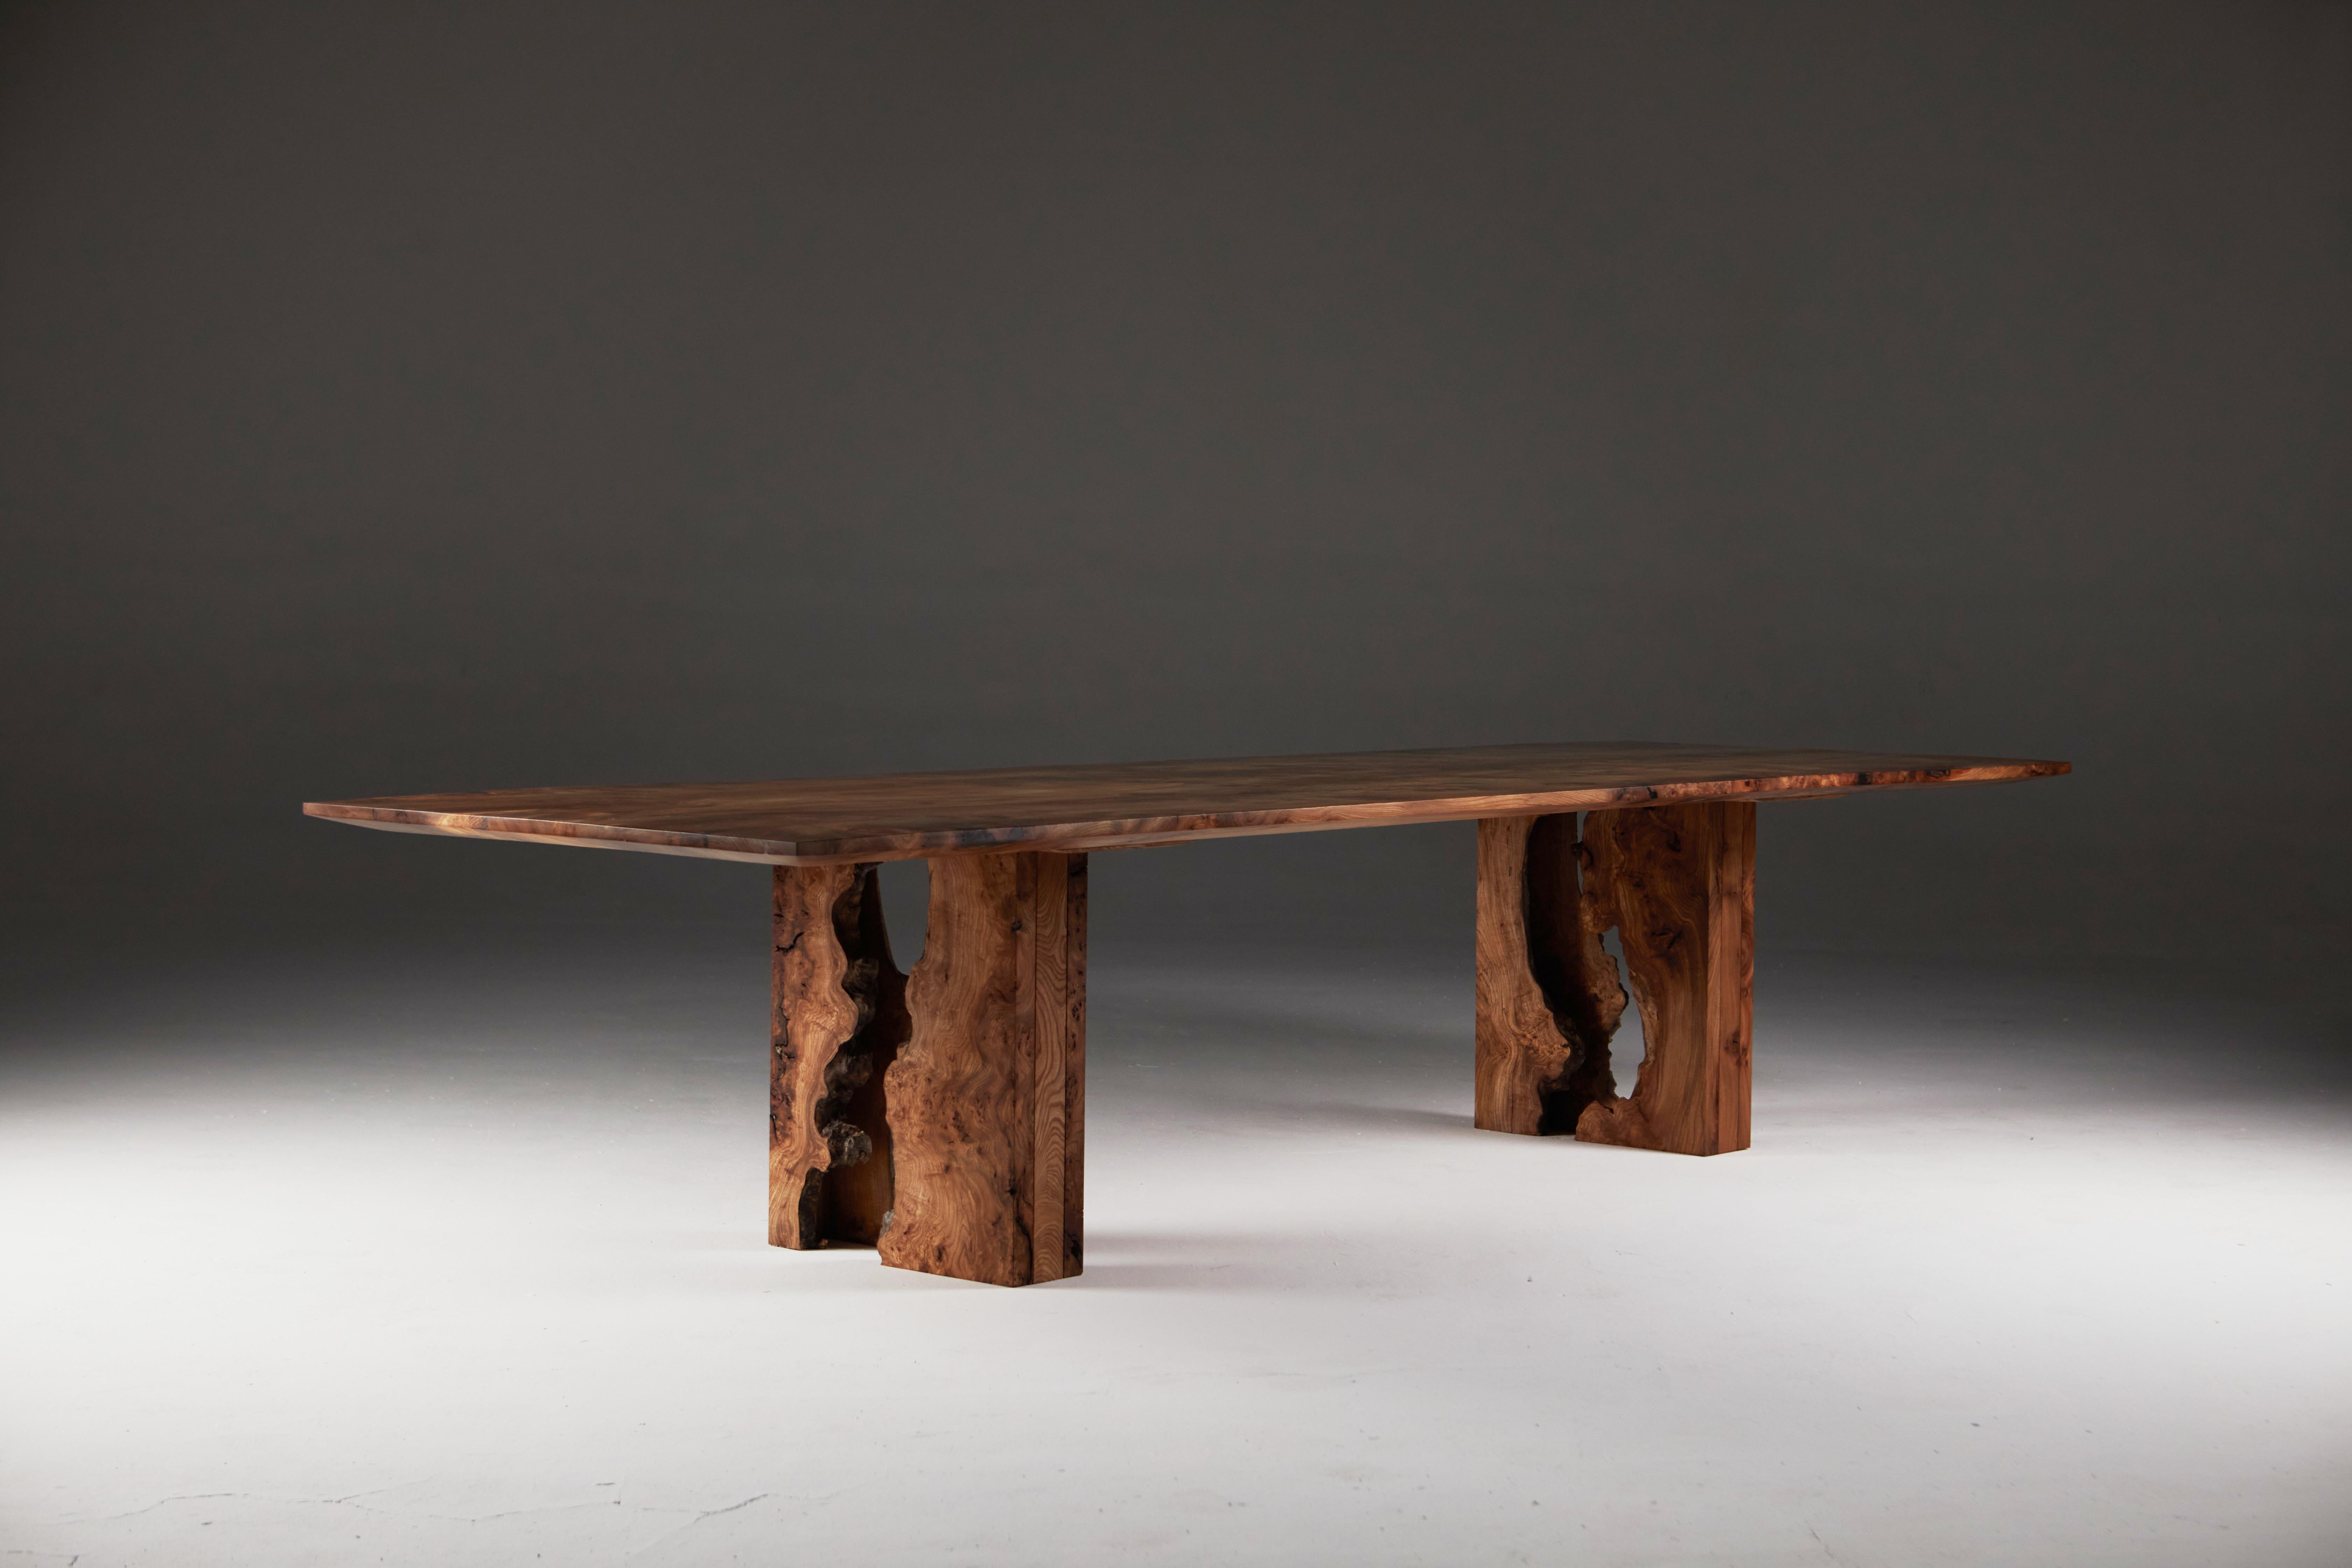 Organic Modern Scottish Burr Elm Table with Inverted Live Edge Legs and Book-matched Top. 